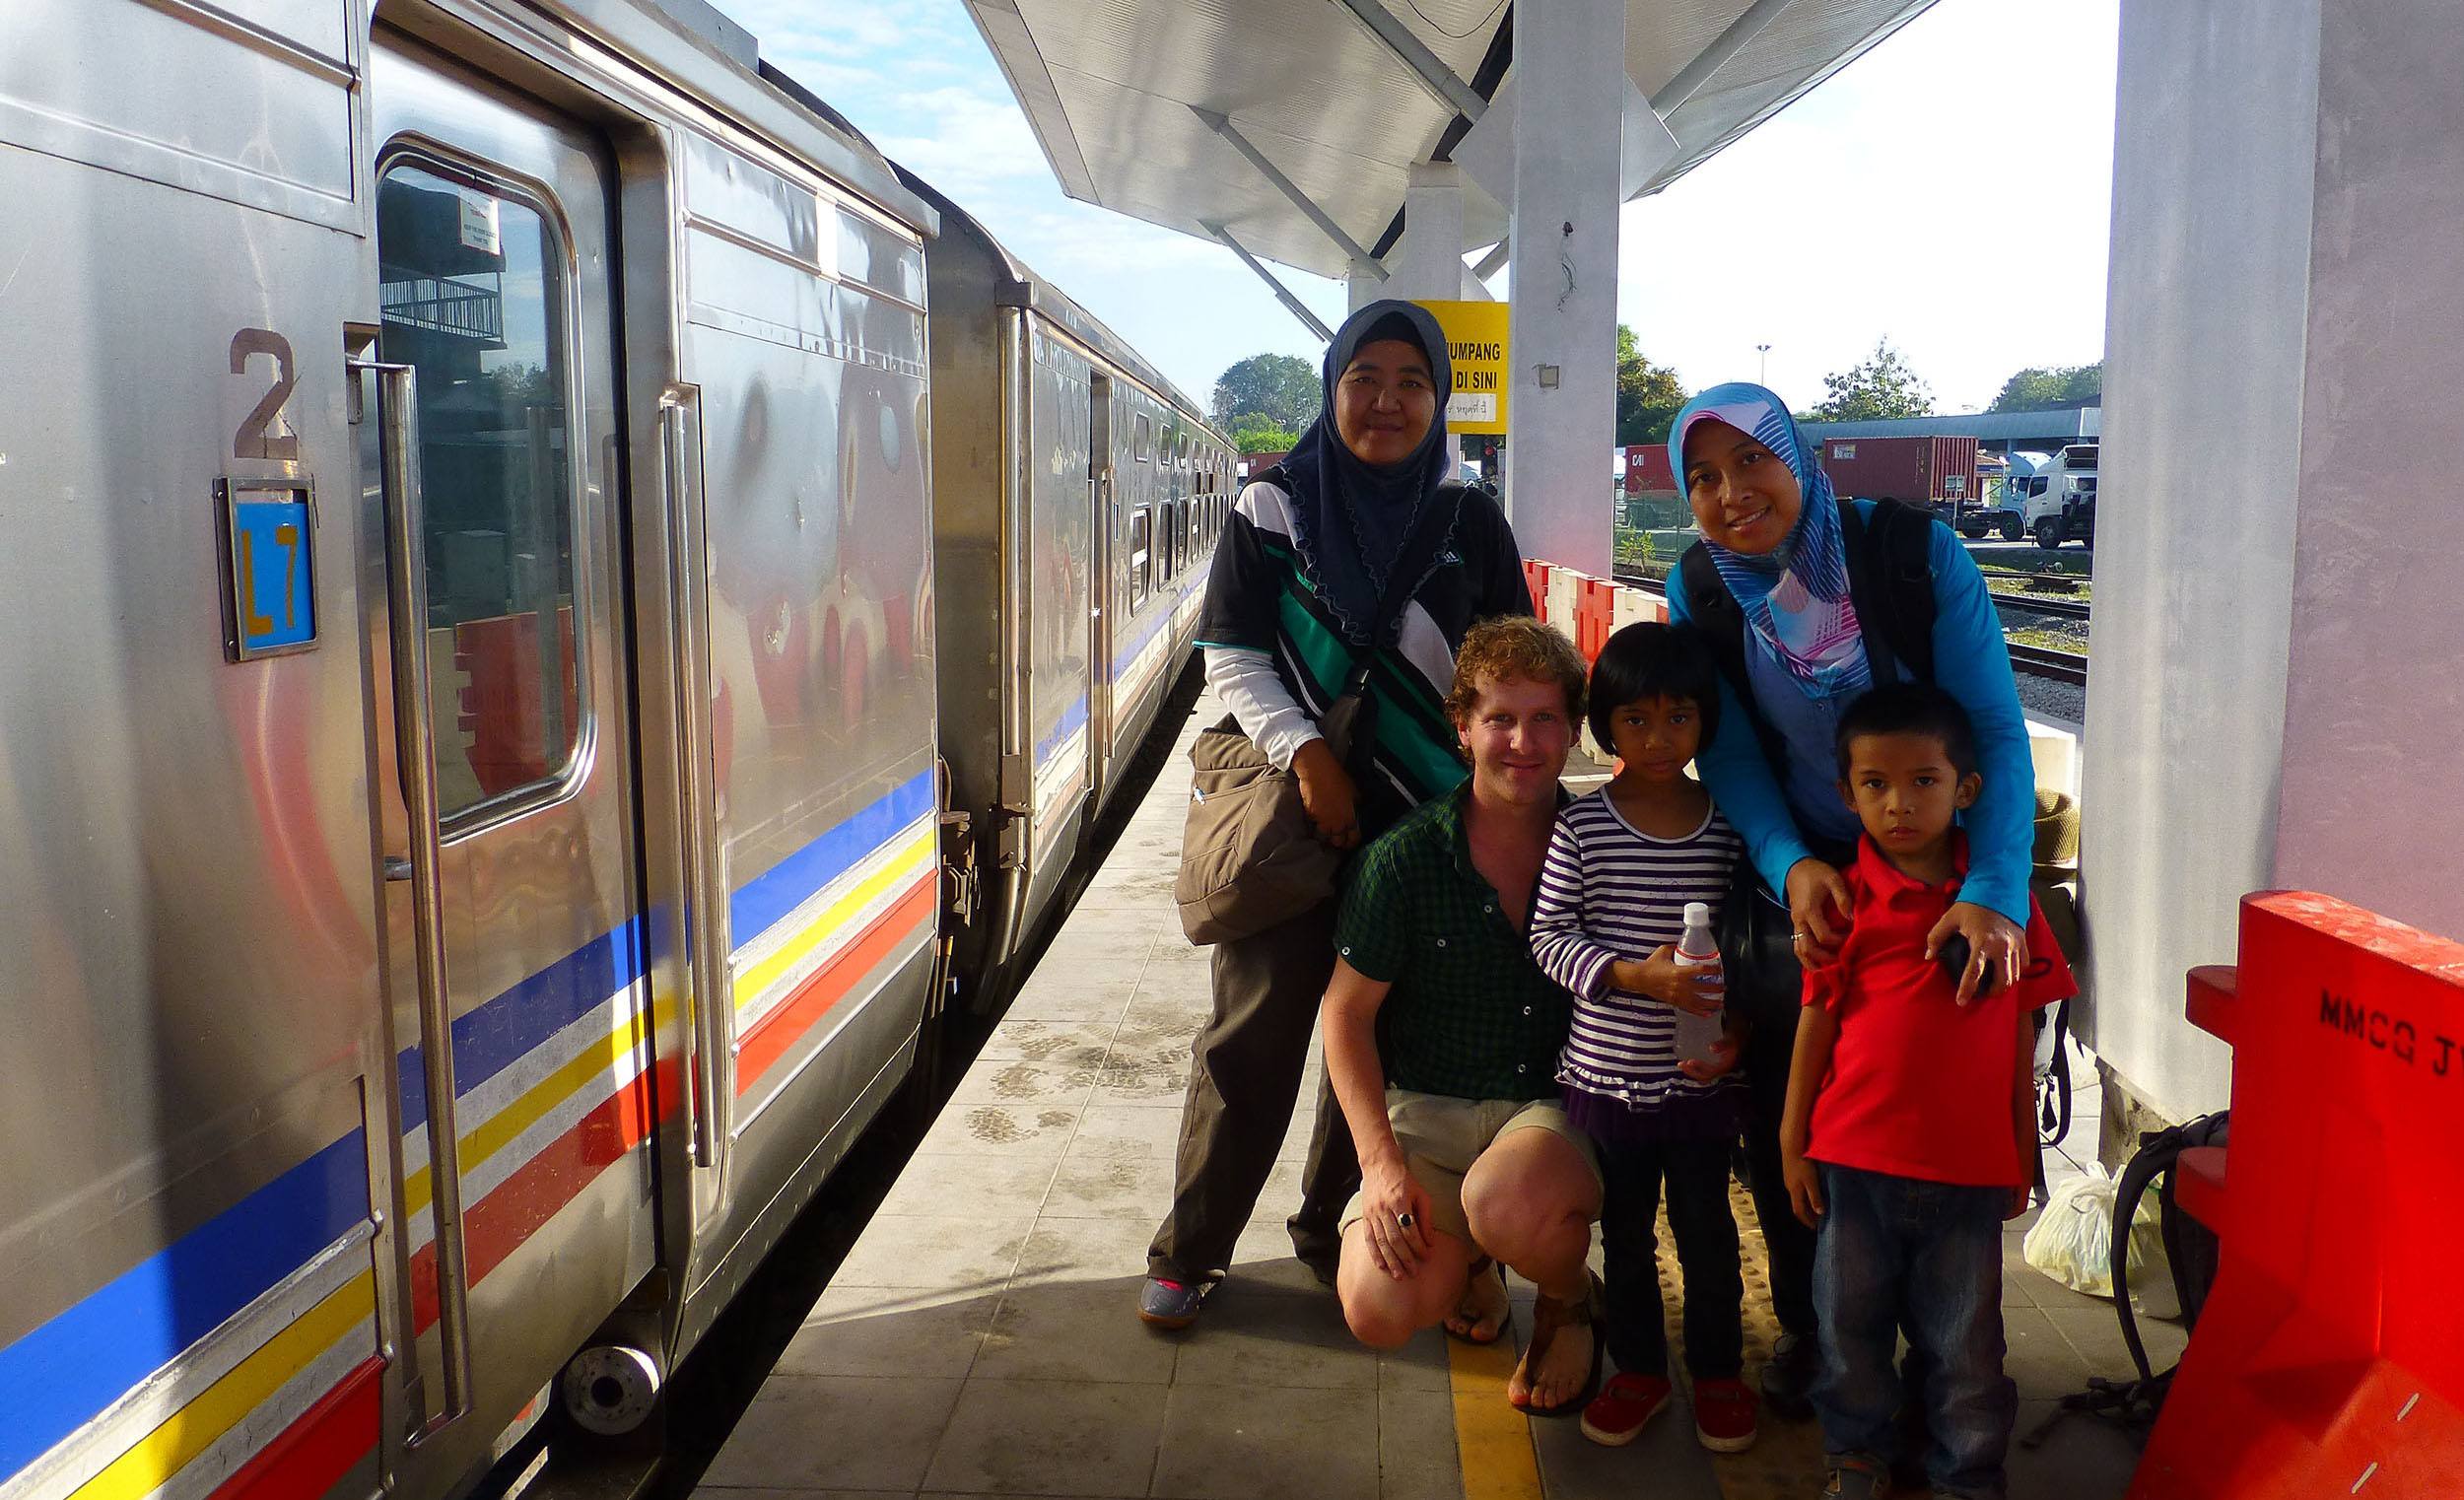 Ben posing with a Malaysian family at a train station in Malaysia en route to Thailand